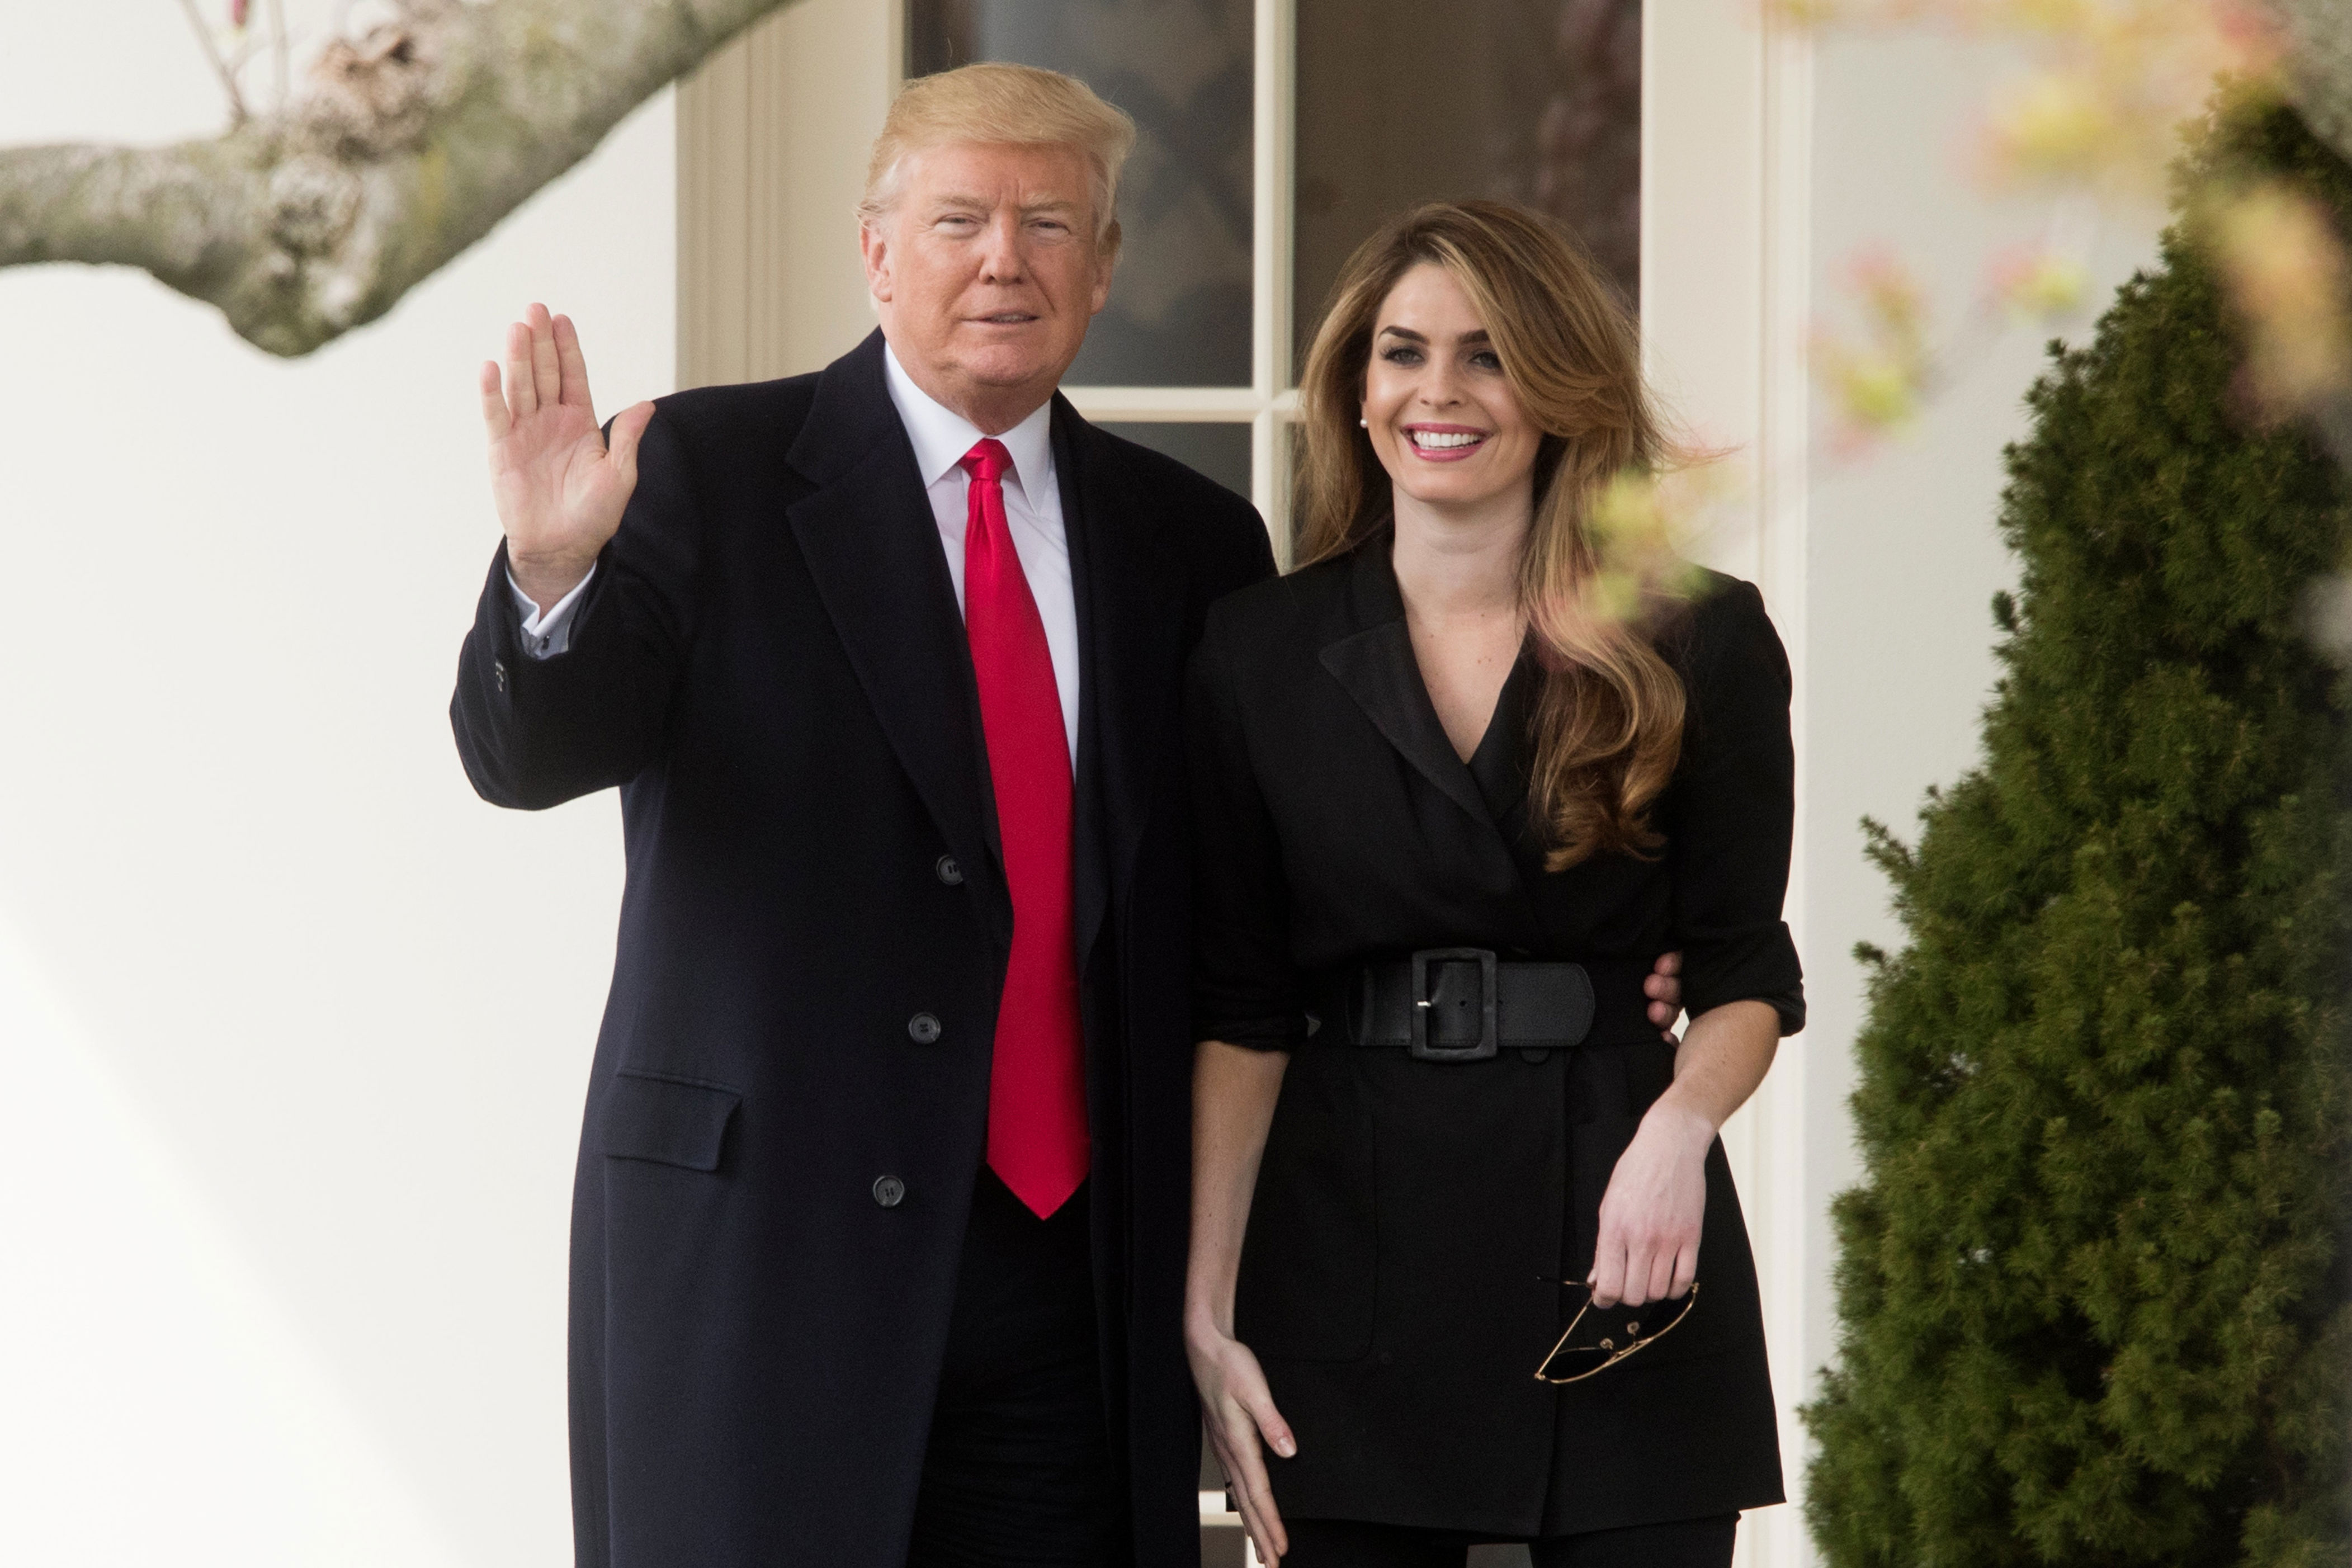 trump trial live: hope hicks gets emotional as she ends week’s testimony detailing access hollywood tape fallout